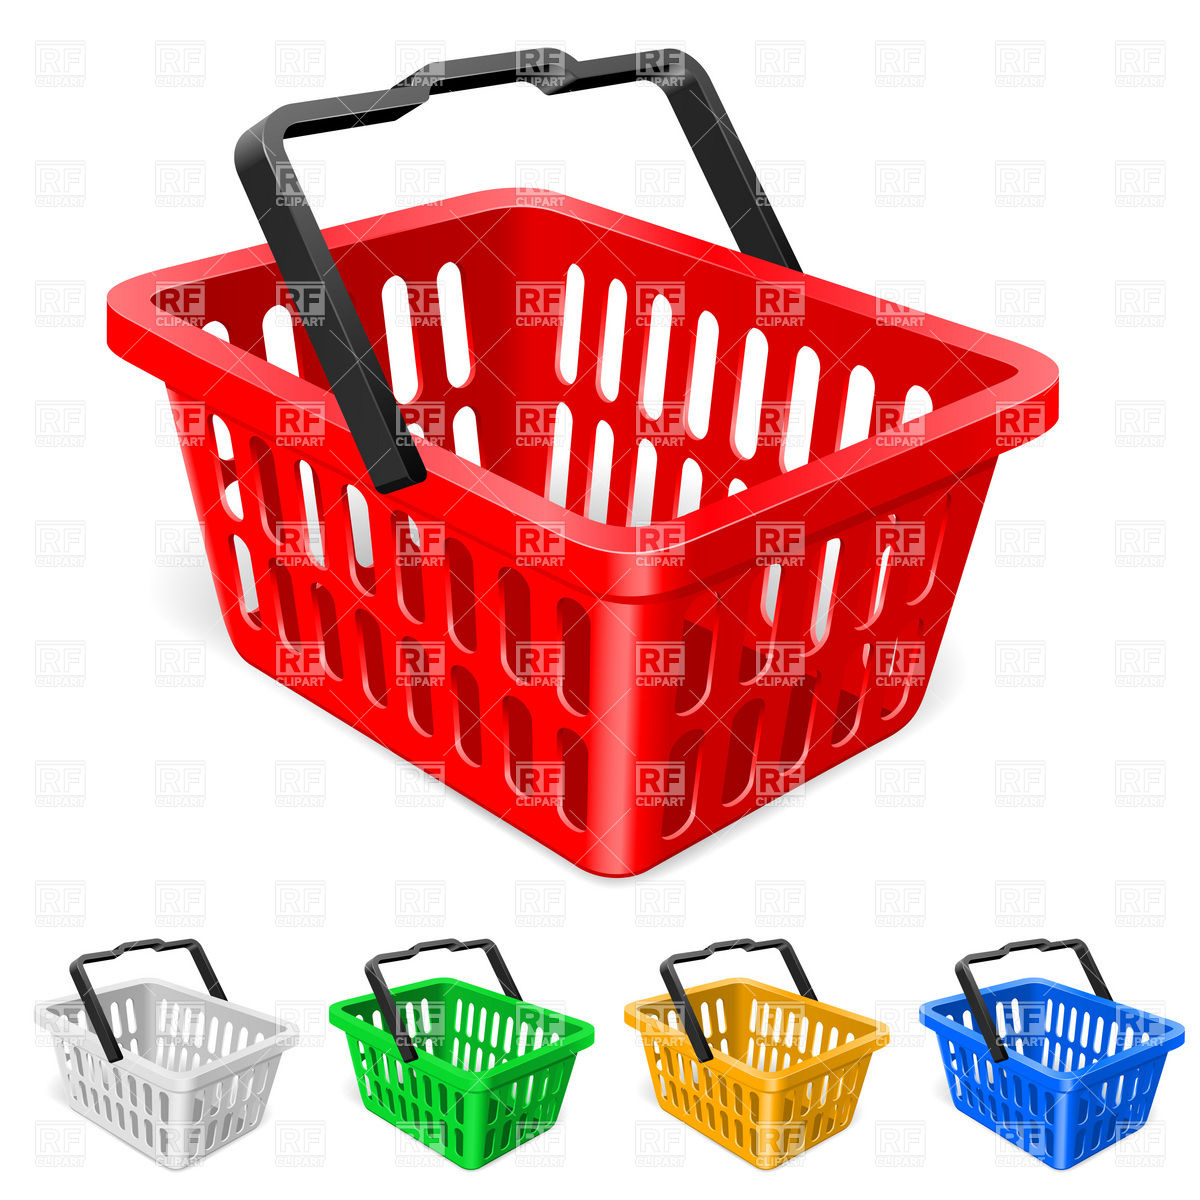 Basket 7640 Objects Download Royalty Free Vector Clipart  Eps